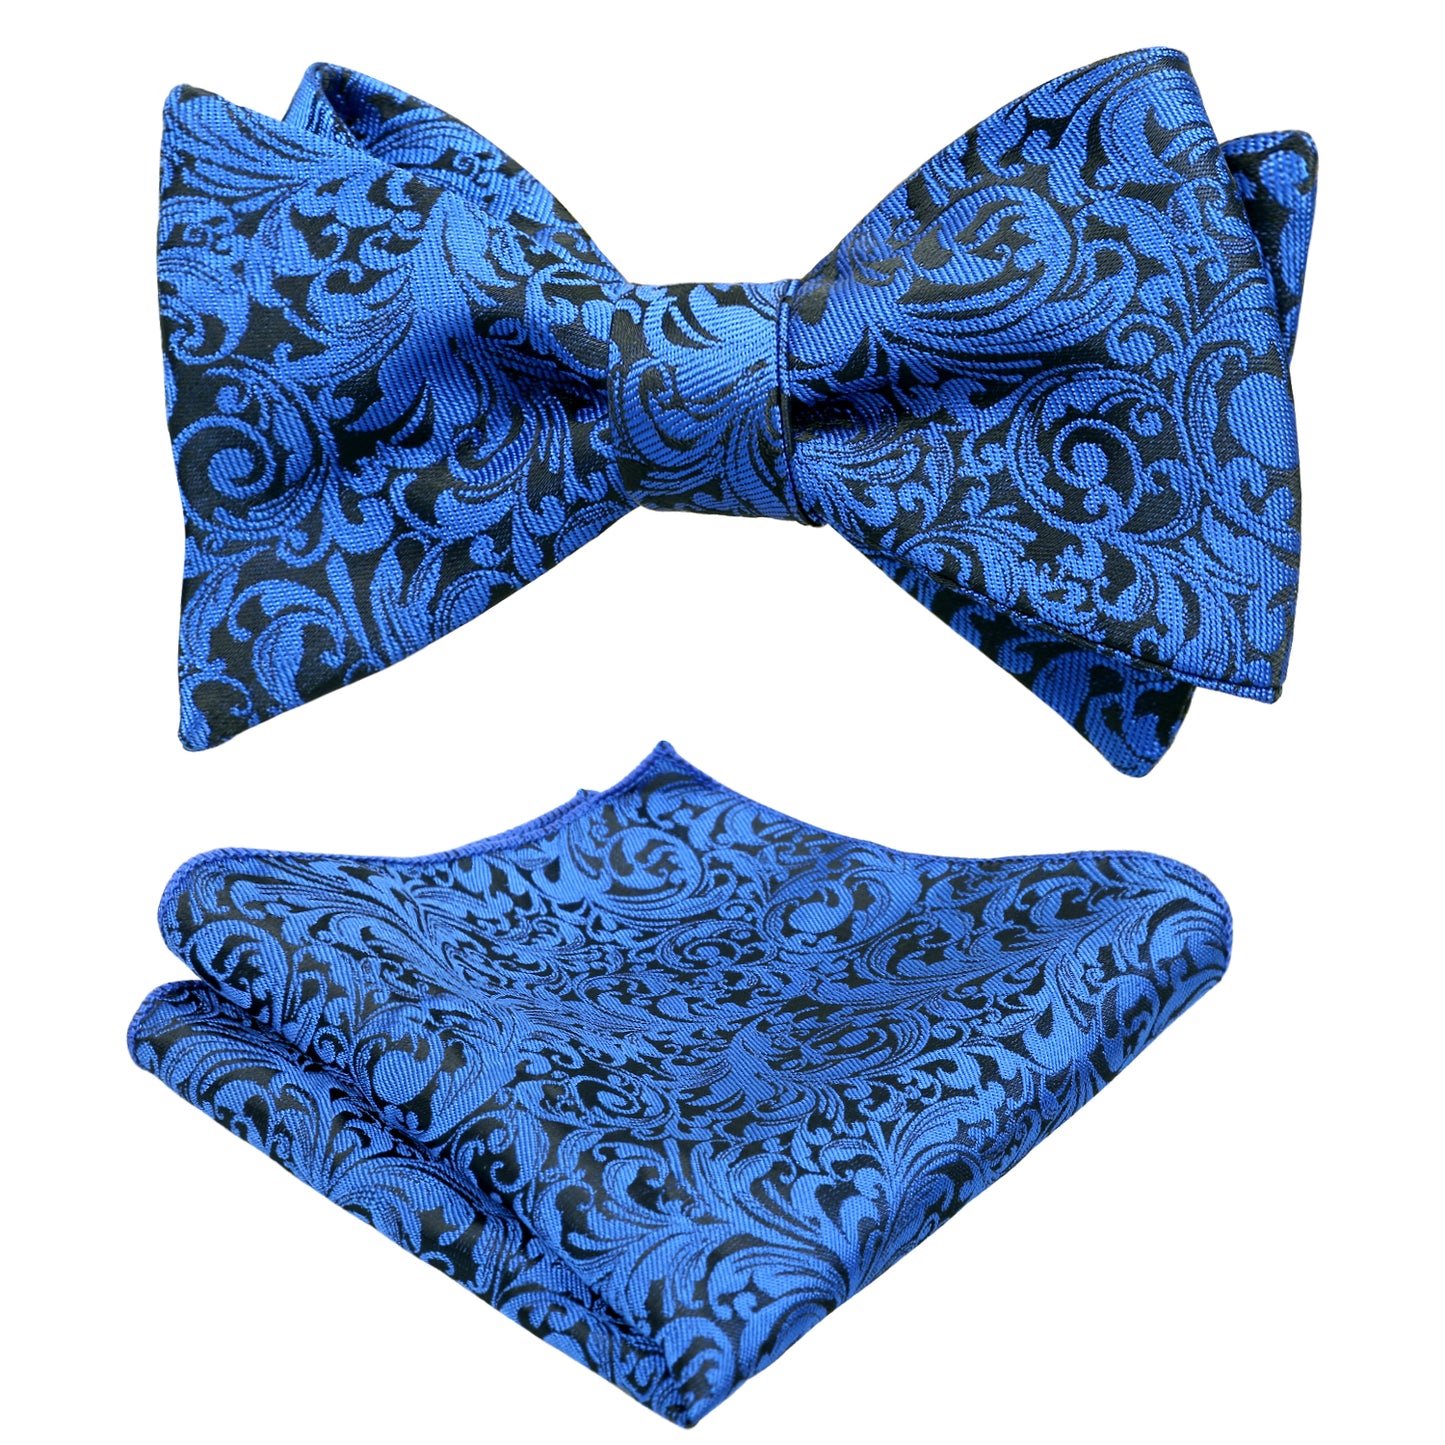 Men's Adjustable Length Self-tied Bow Ties with Pocket Square Set #041